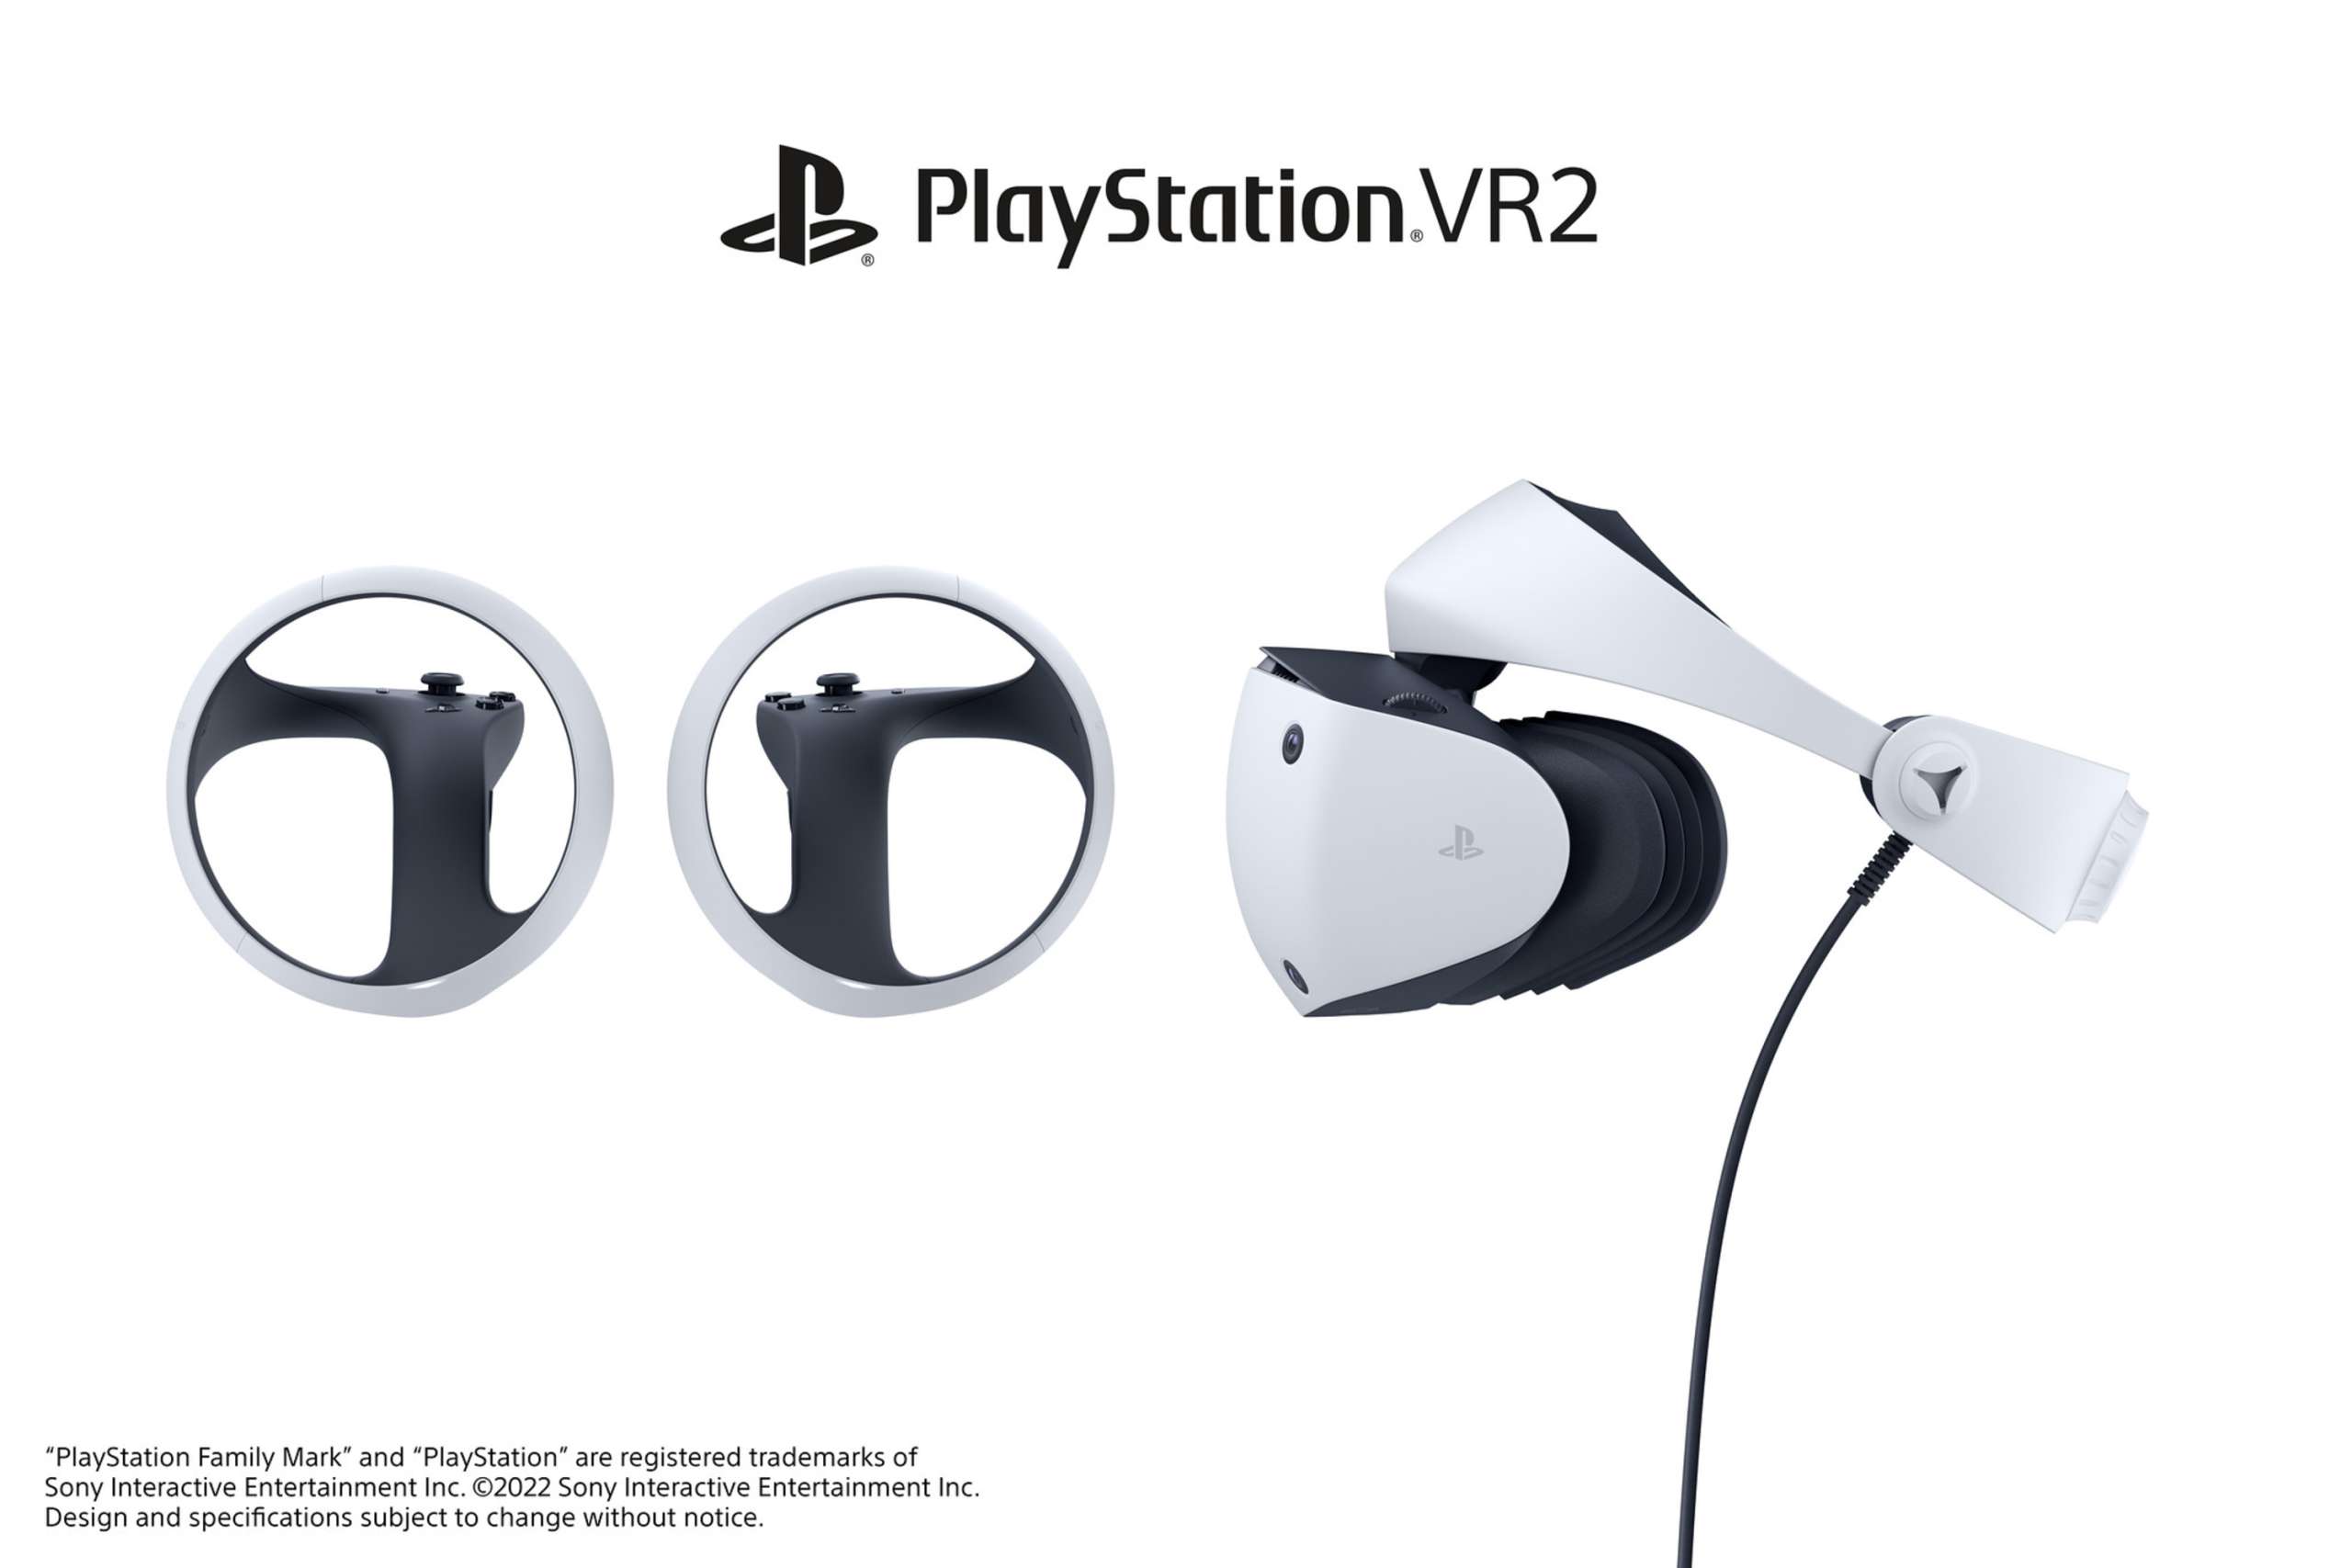 Developers Should Find It Simpler To Adapt Their Games To PlayStation VR2